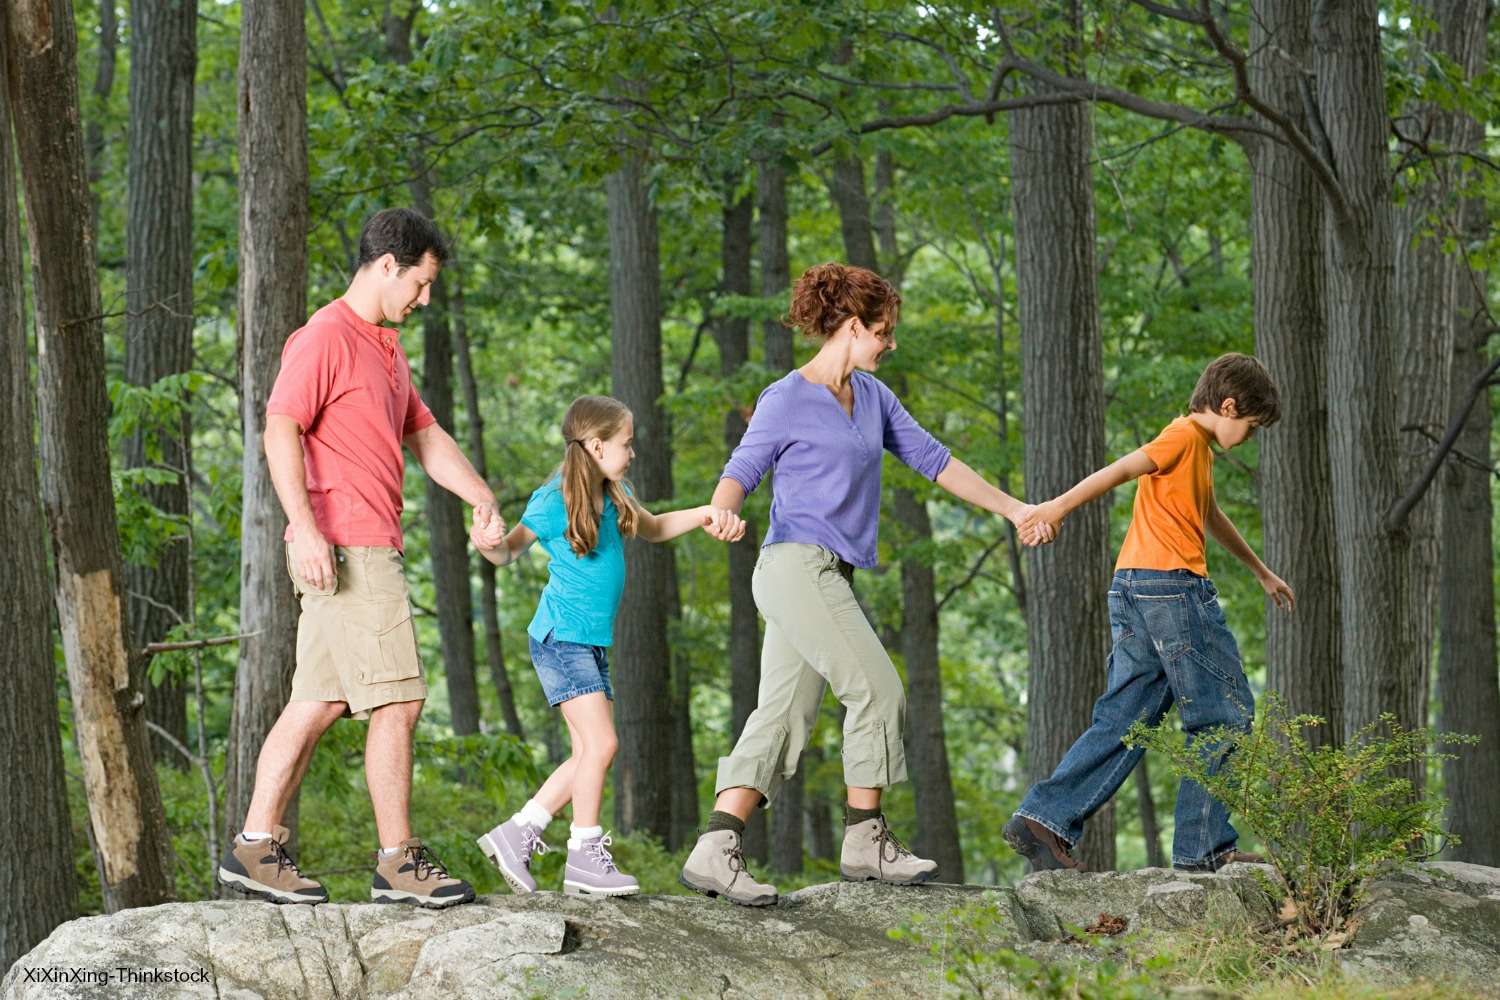 A family hiking as part of their Maine itinerary.